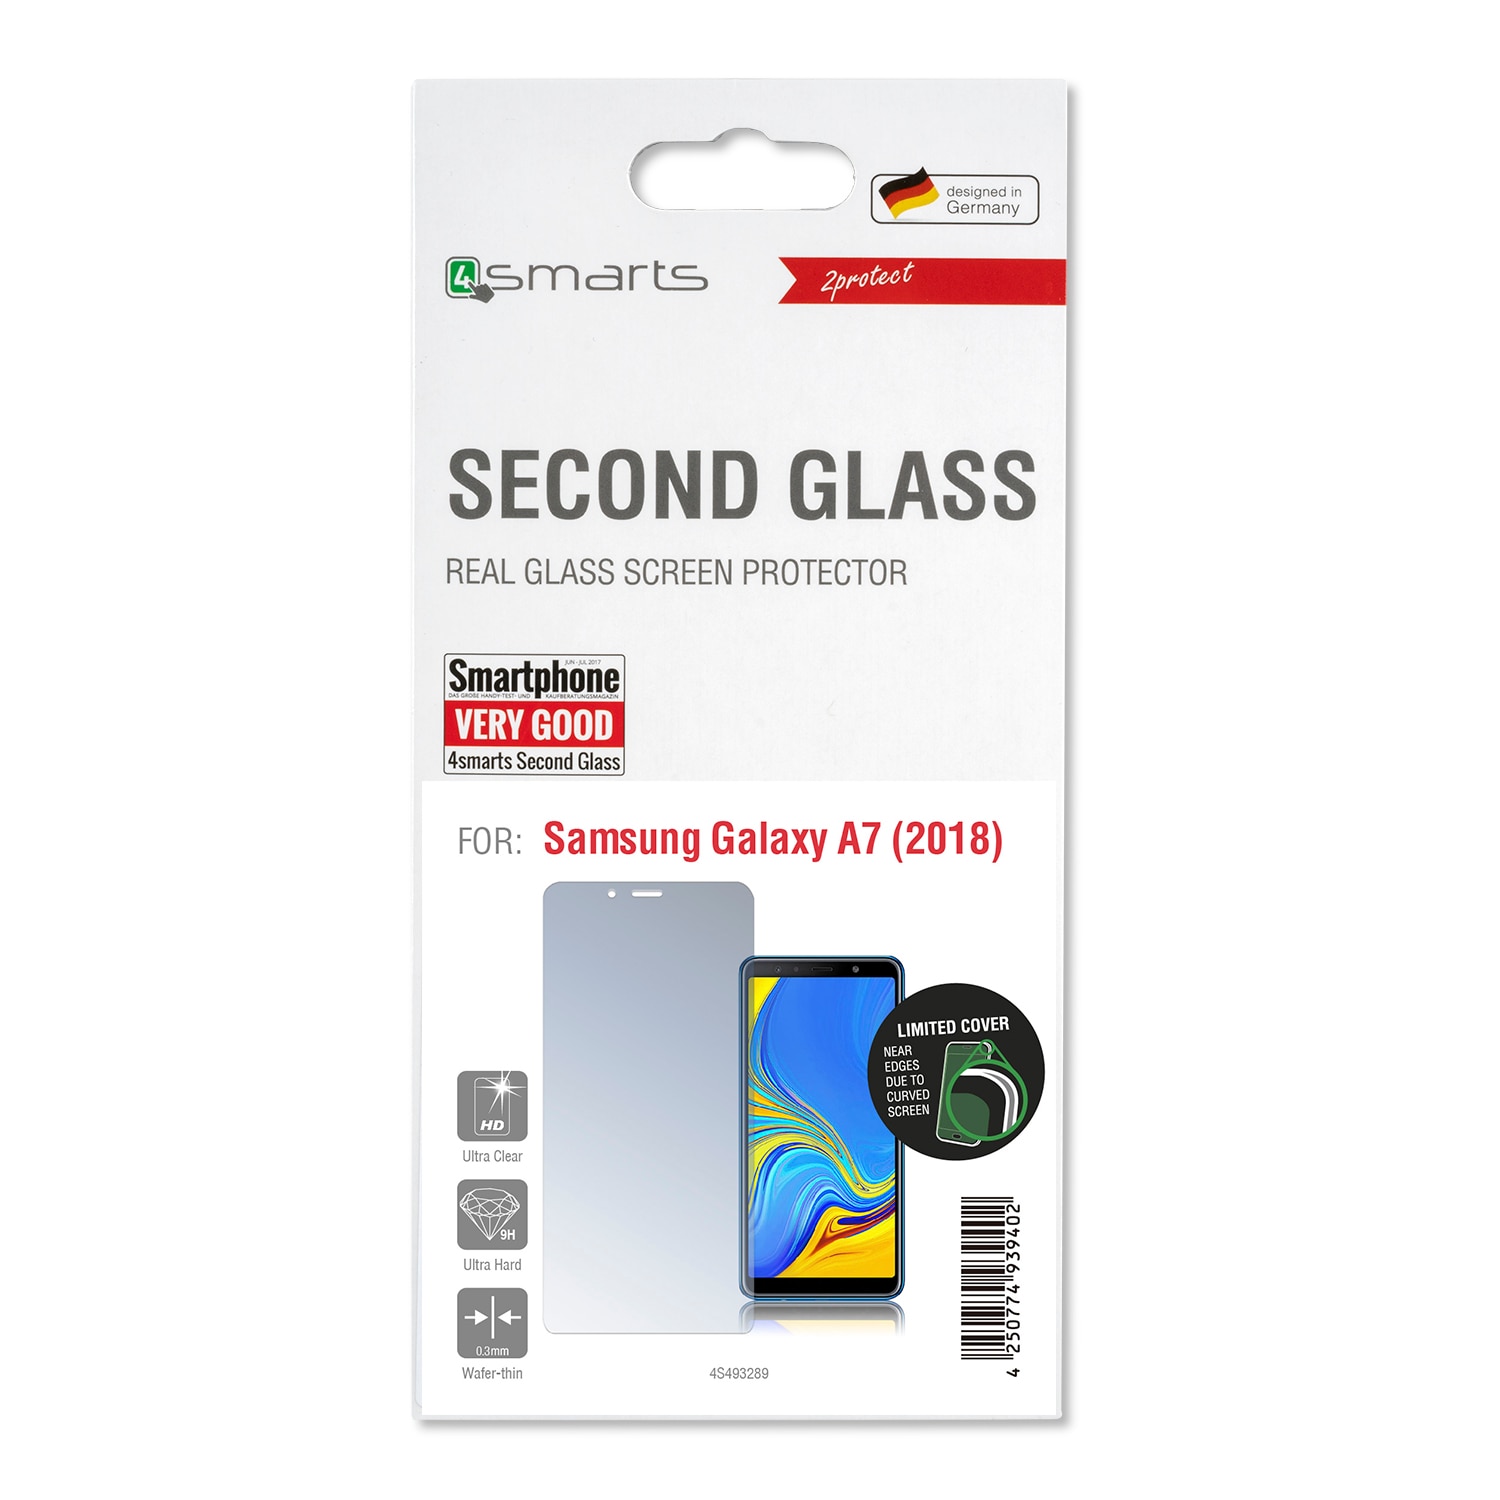 4smarts Second Glass Limited Cover til Samsung Galaxy A7(2018)